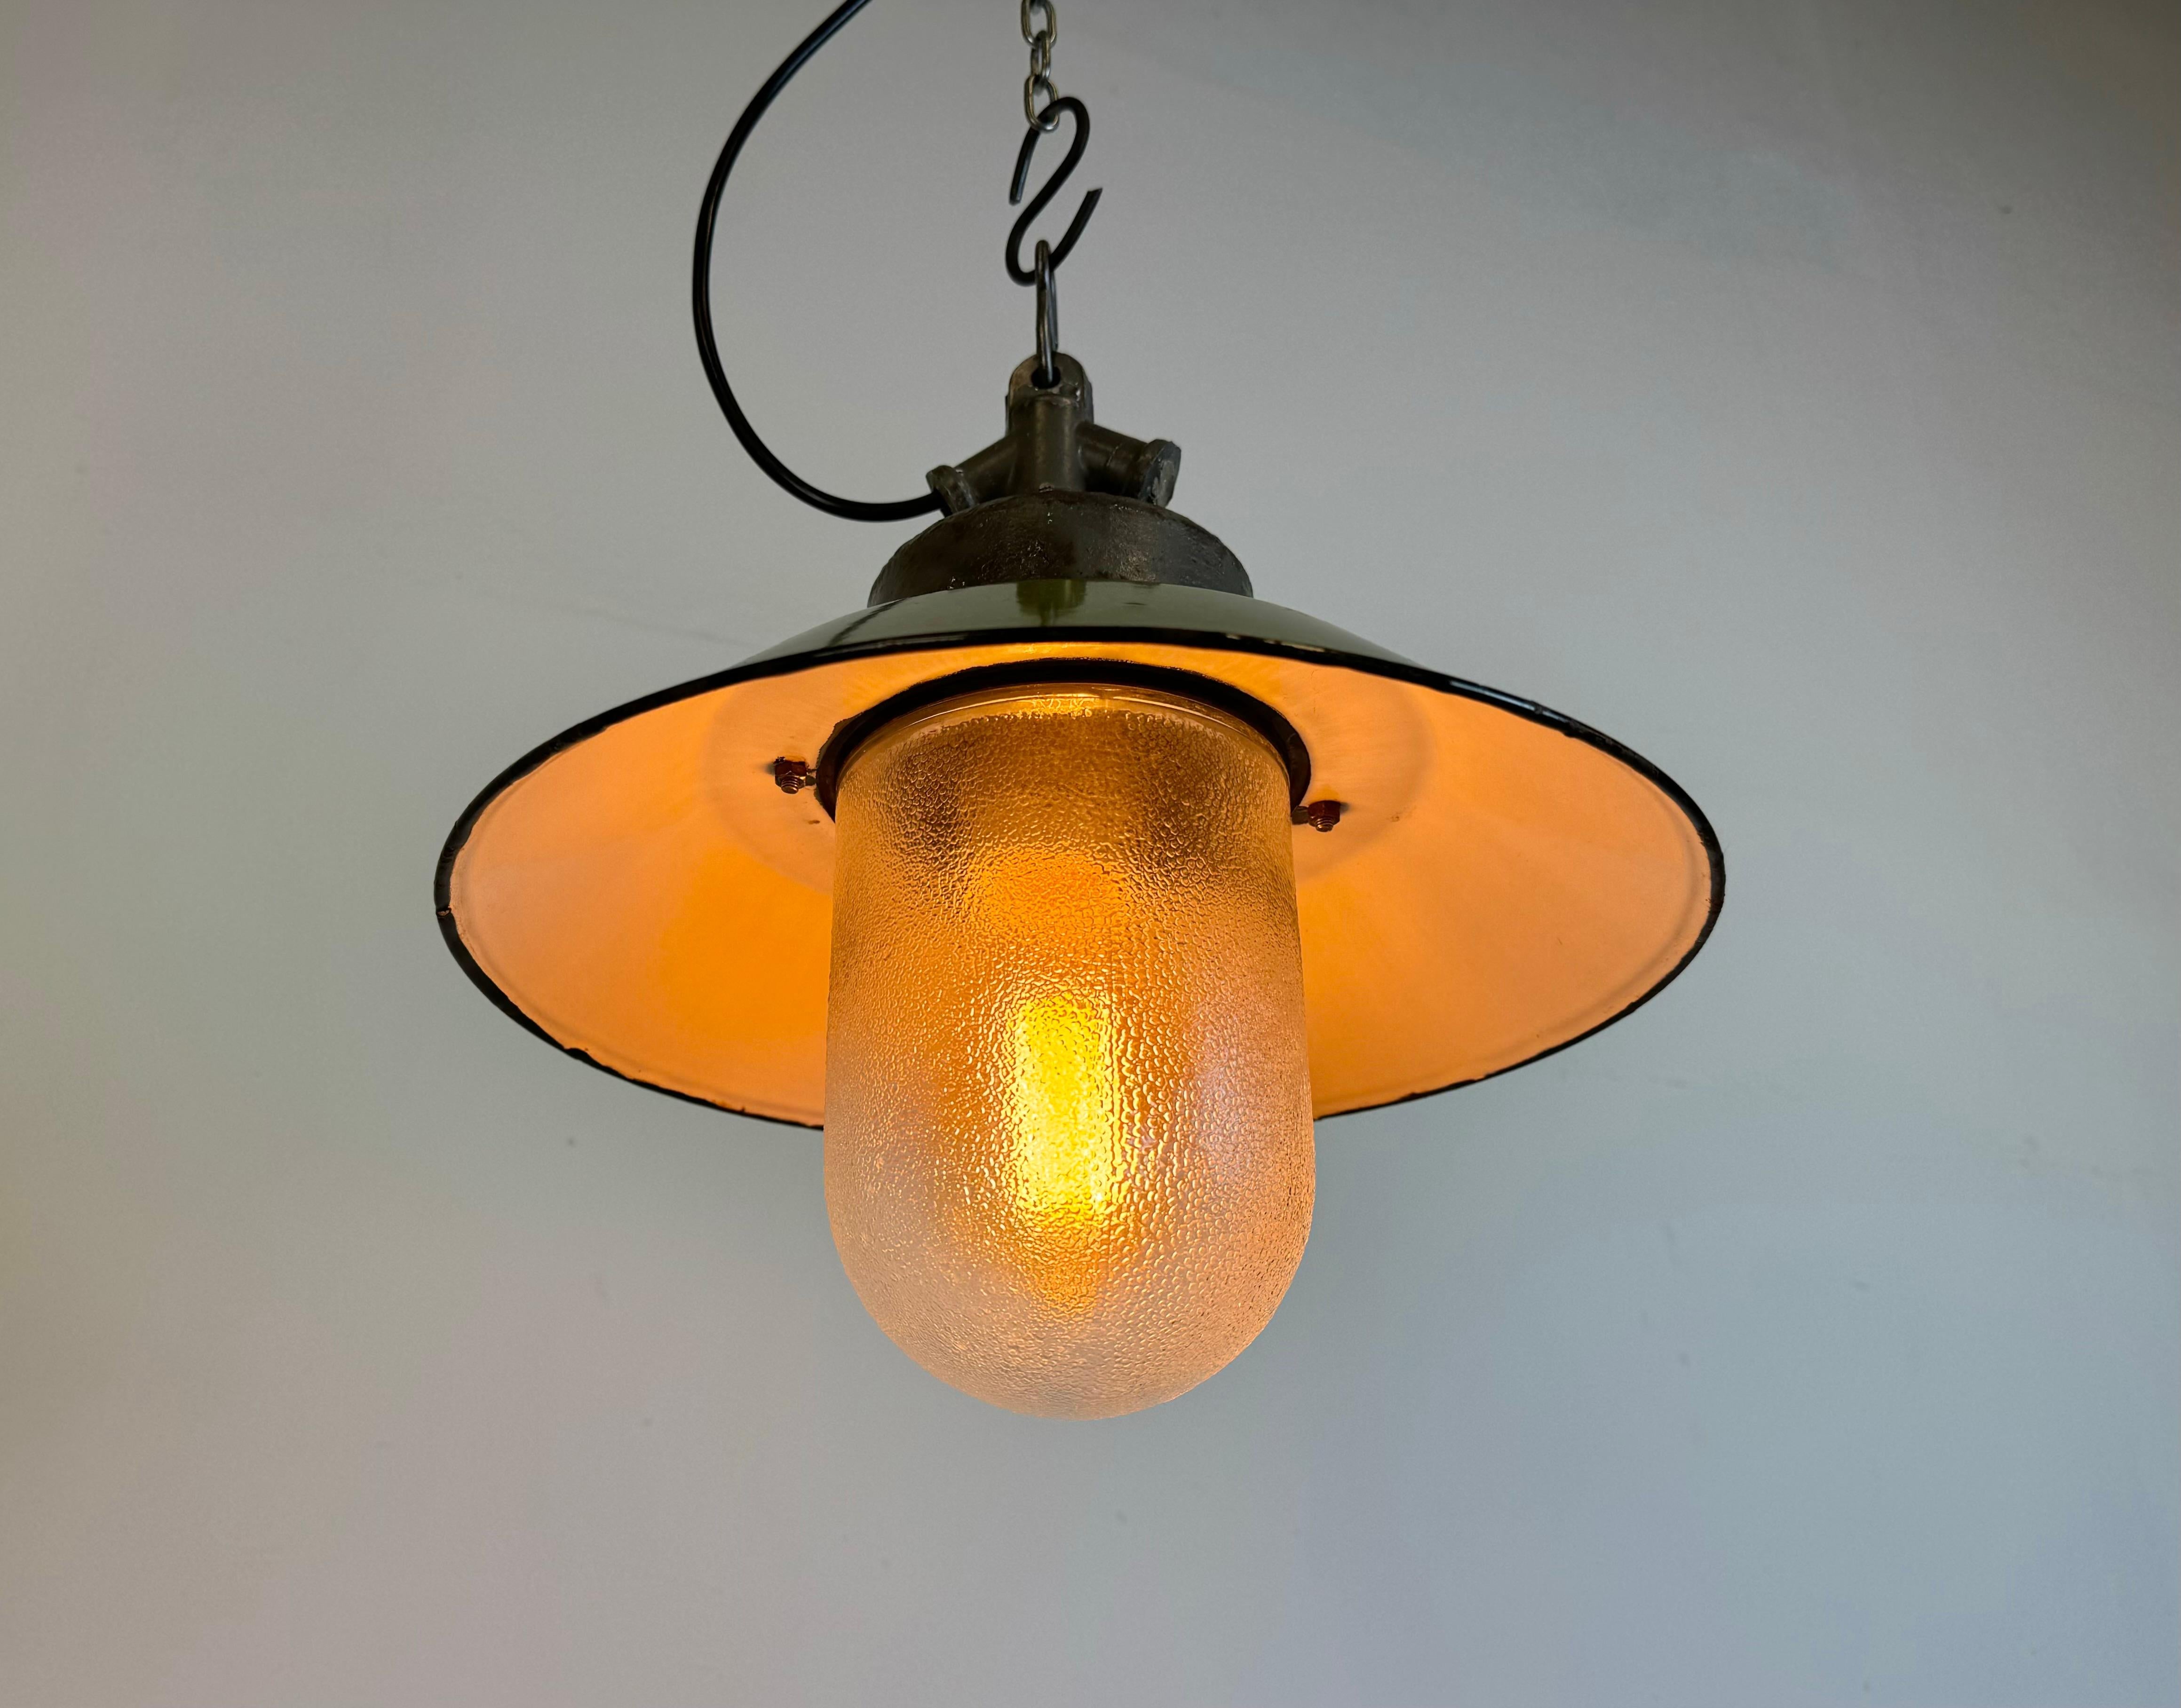 Green Enamel and Cast Iron Industrial Pendant Light, 1960s For Sale 7